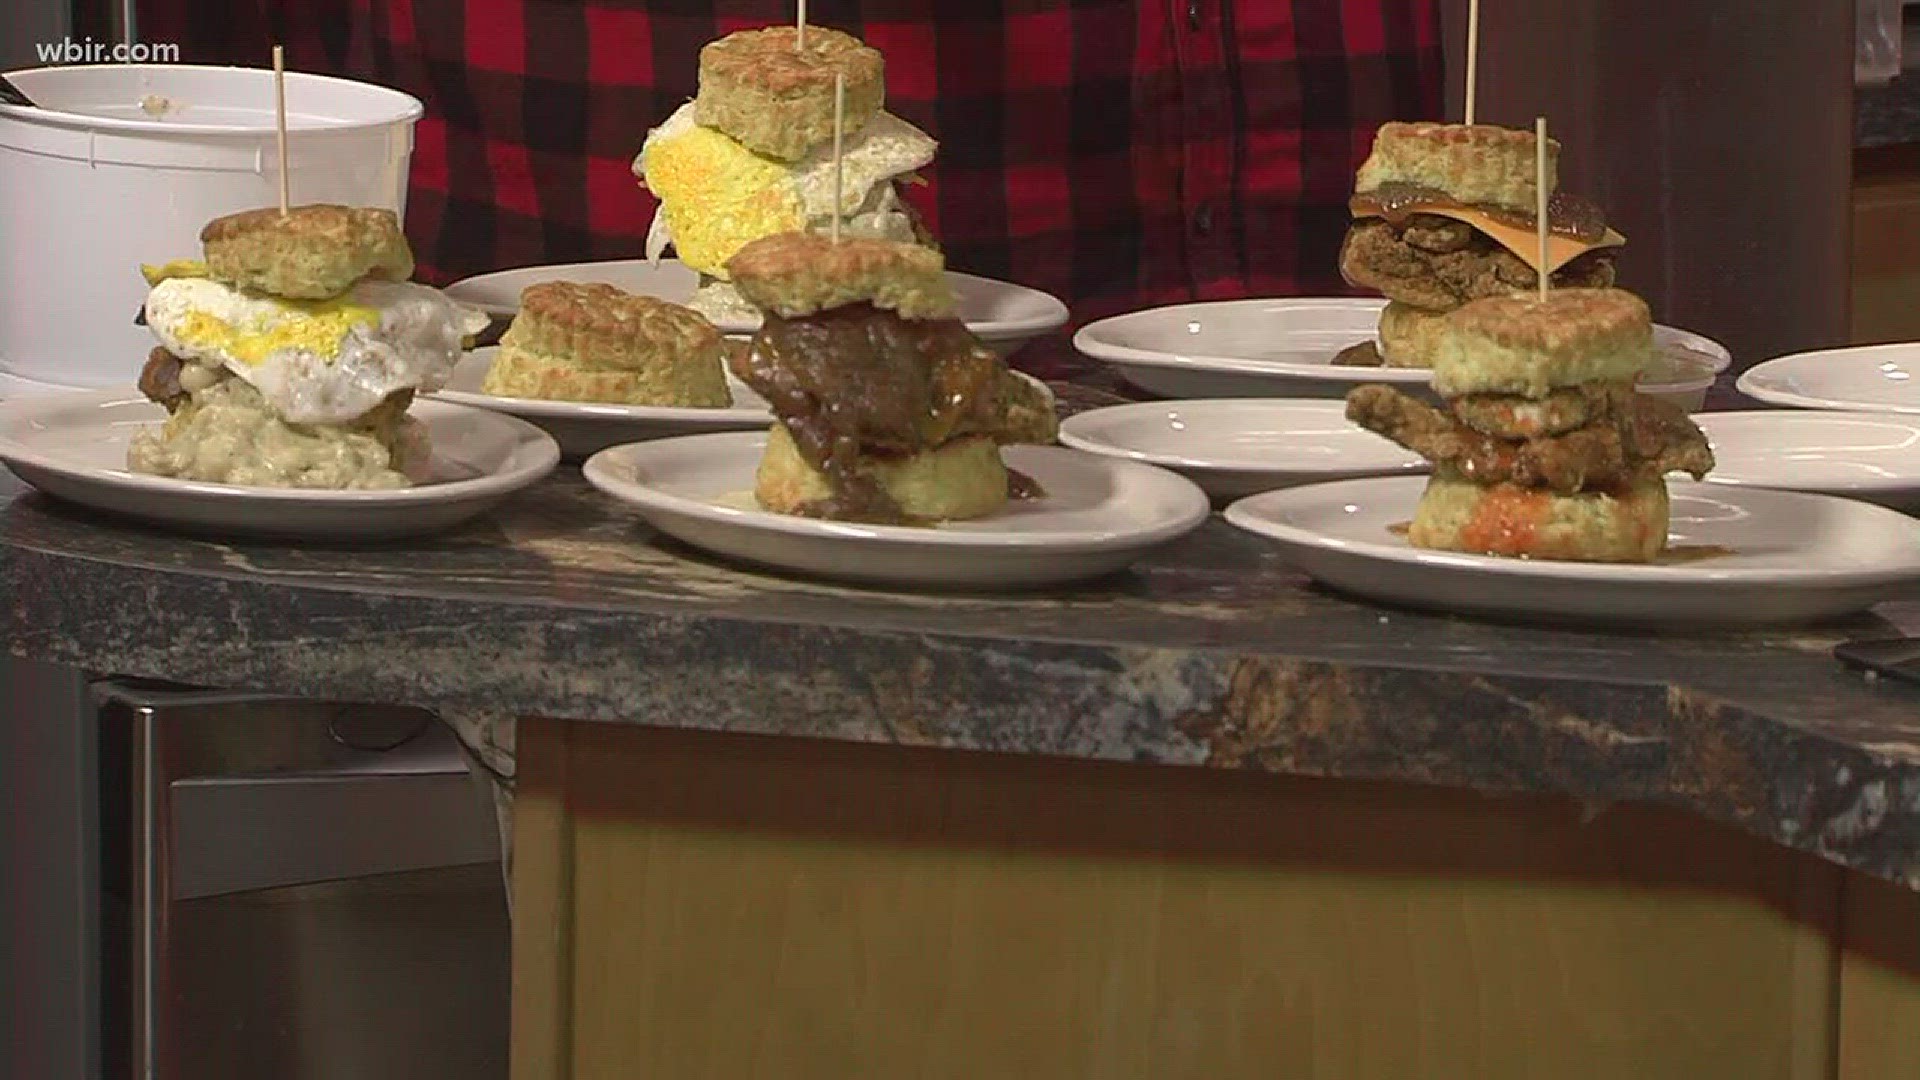 Adam Lutrell with Maple Street Biscuit Co. stopped by the kitchen studio to show us what goes into making some of the new restaurant's signature dishes.